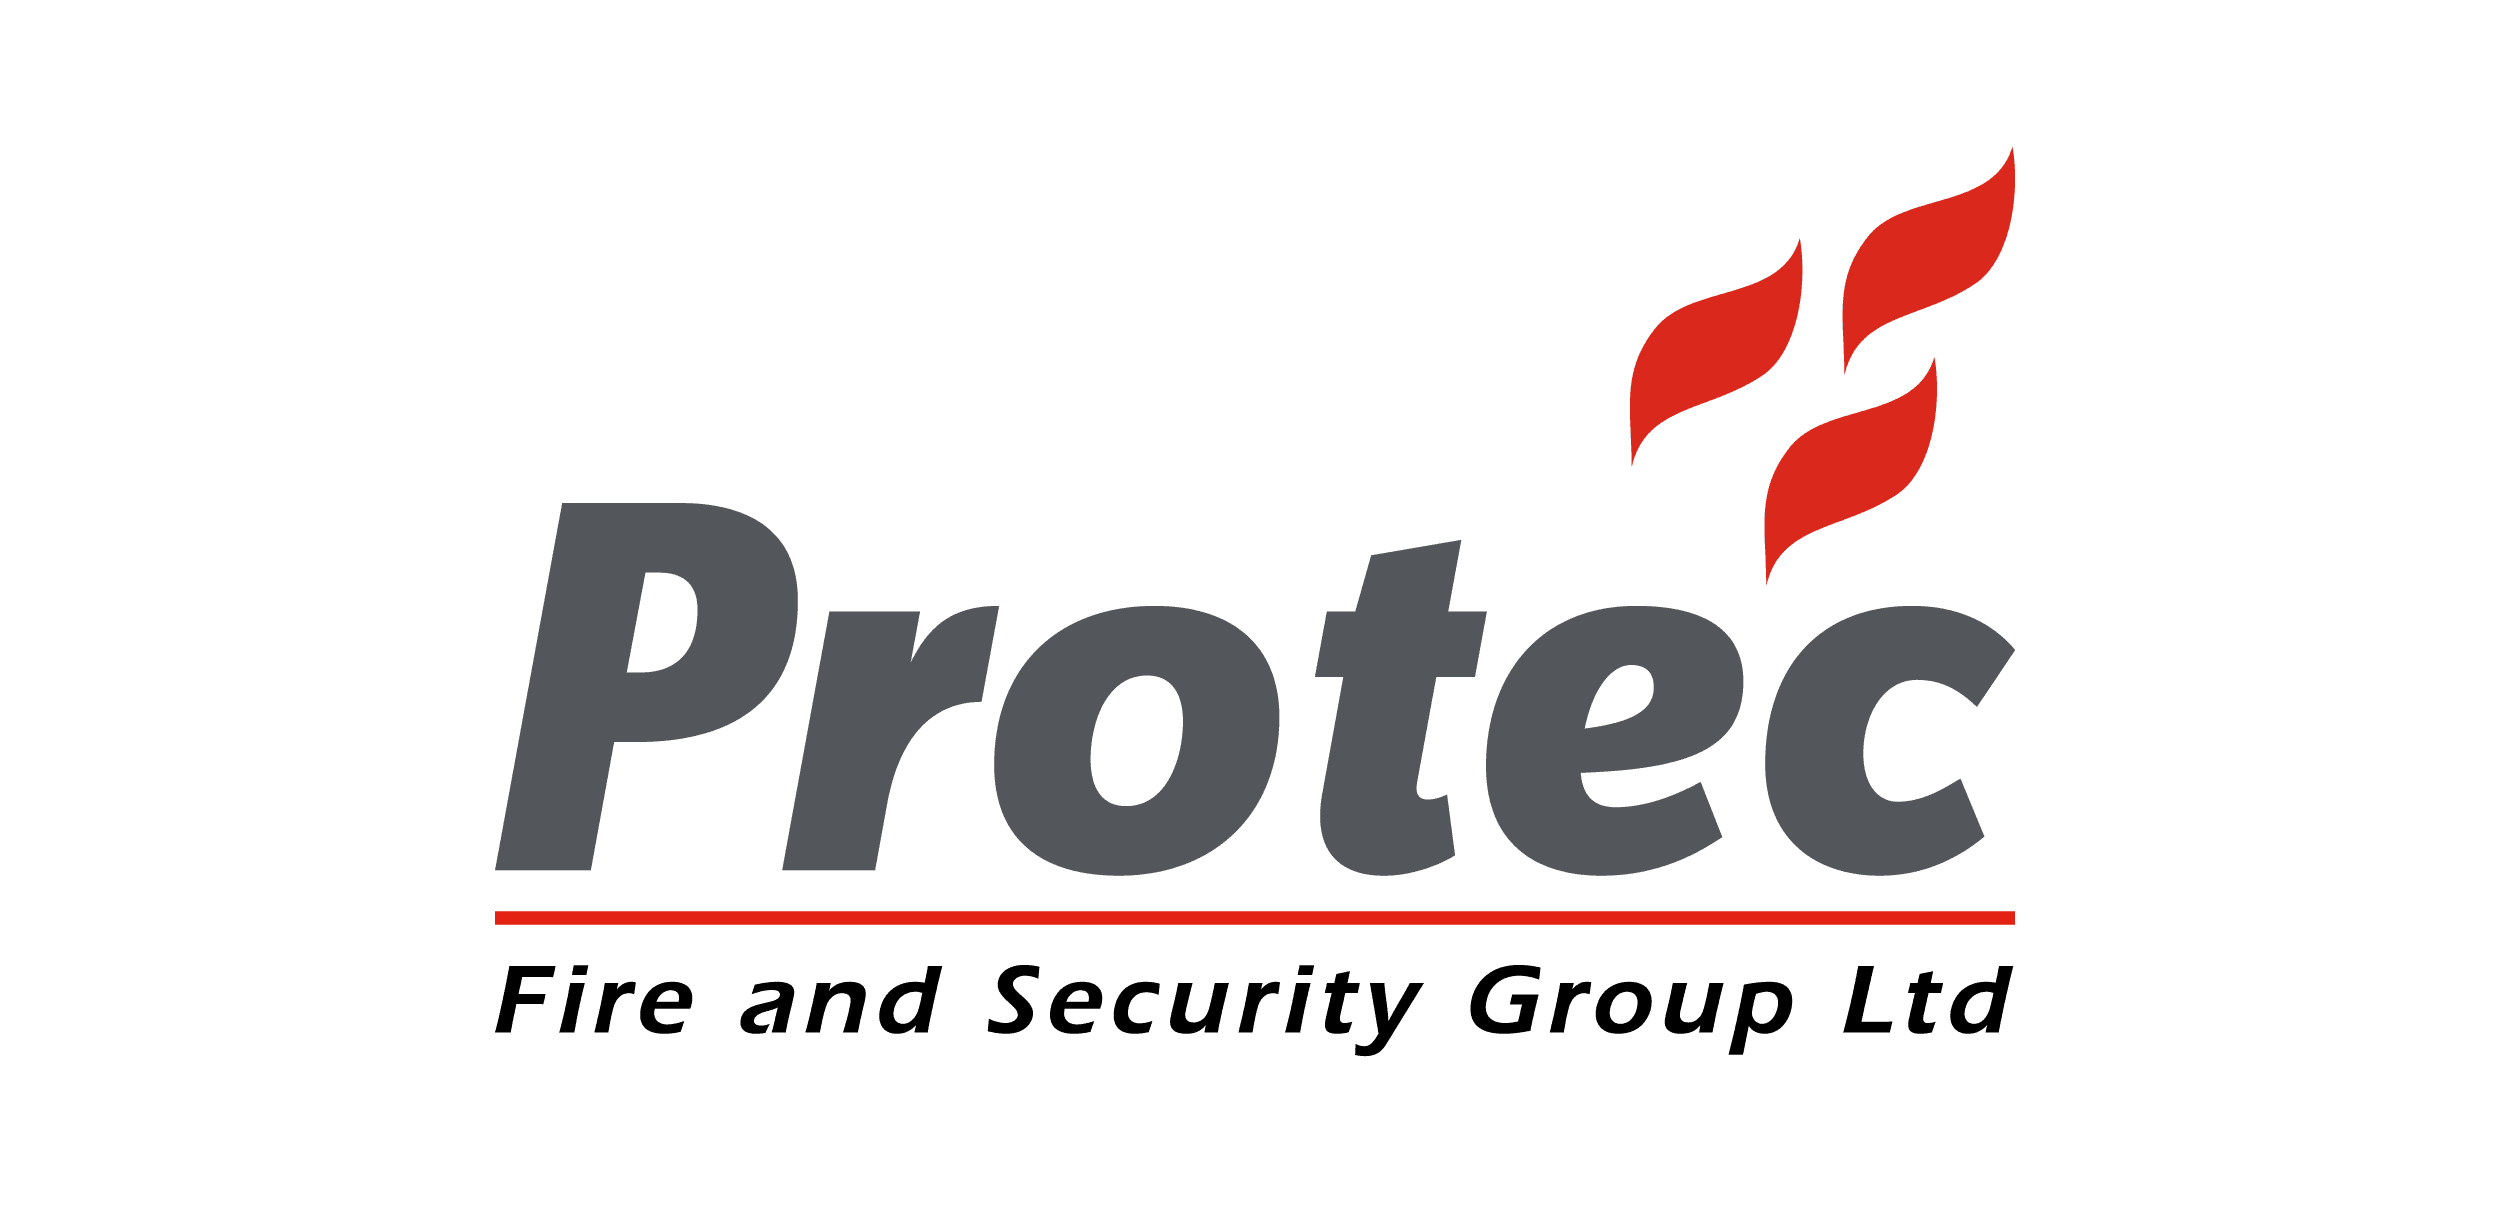 Portec Fire and Security Group - Home